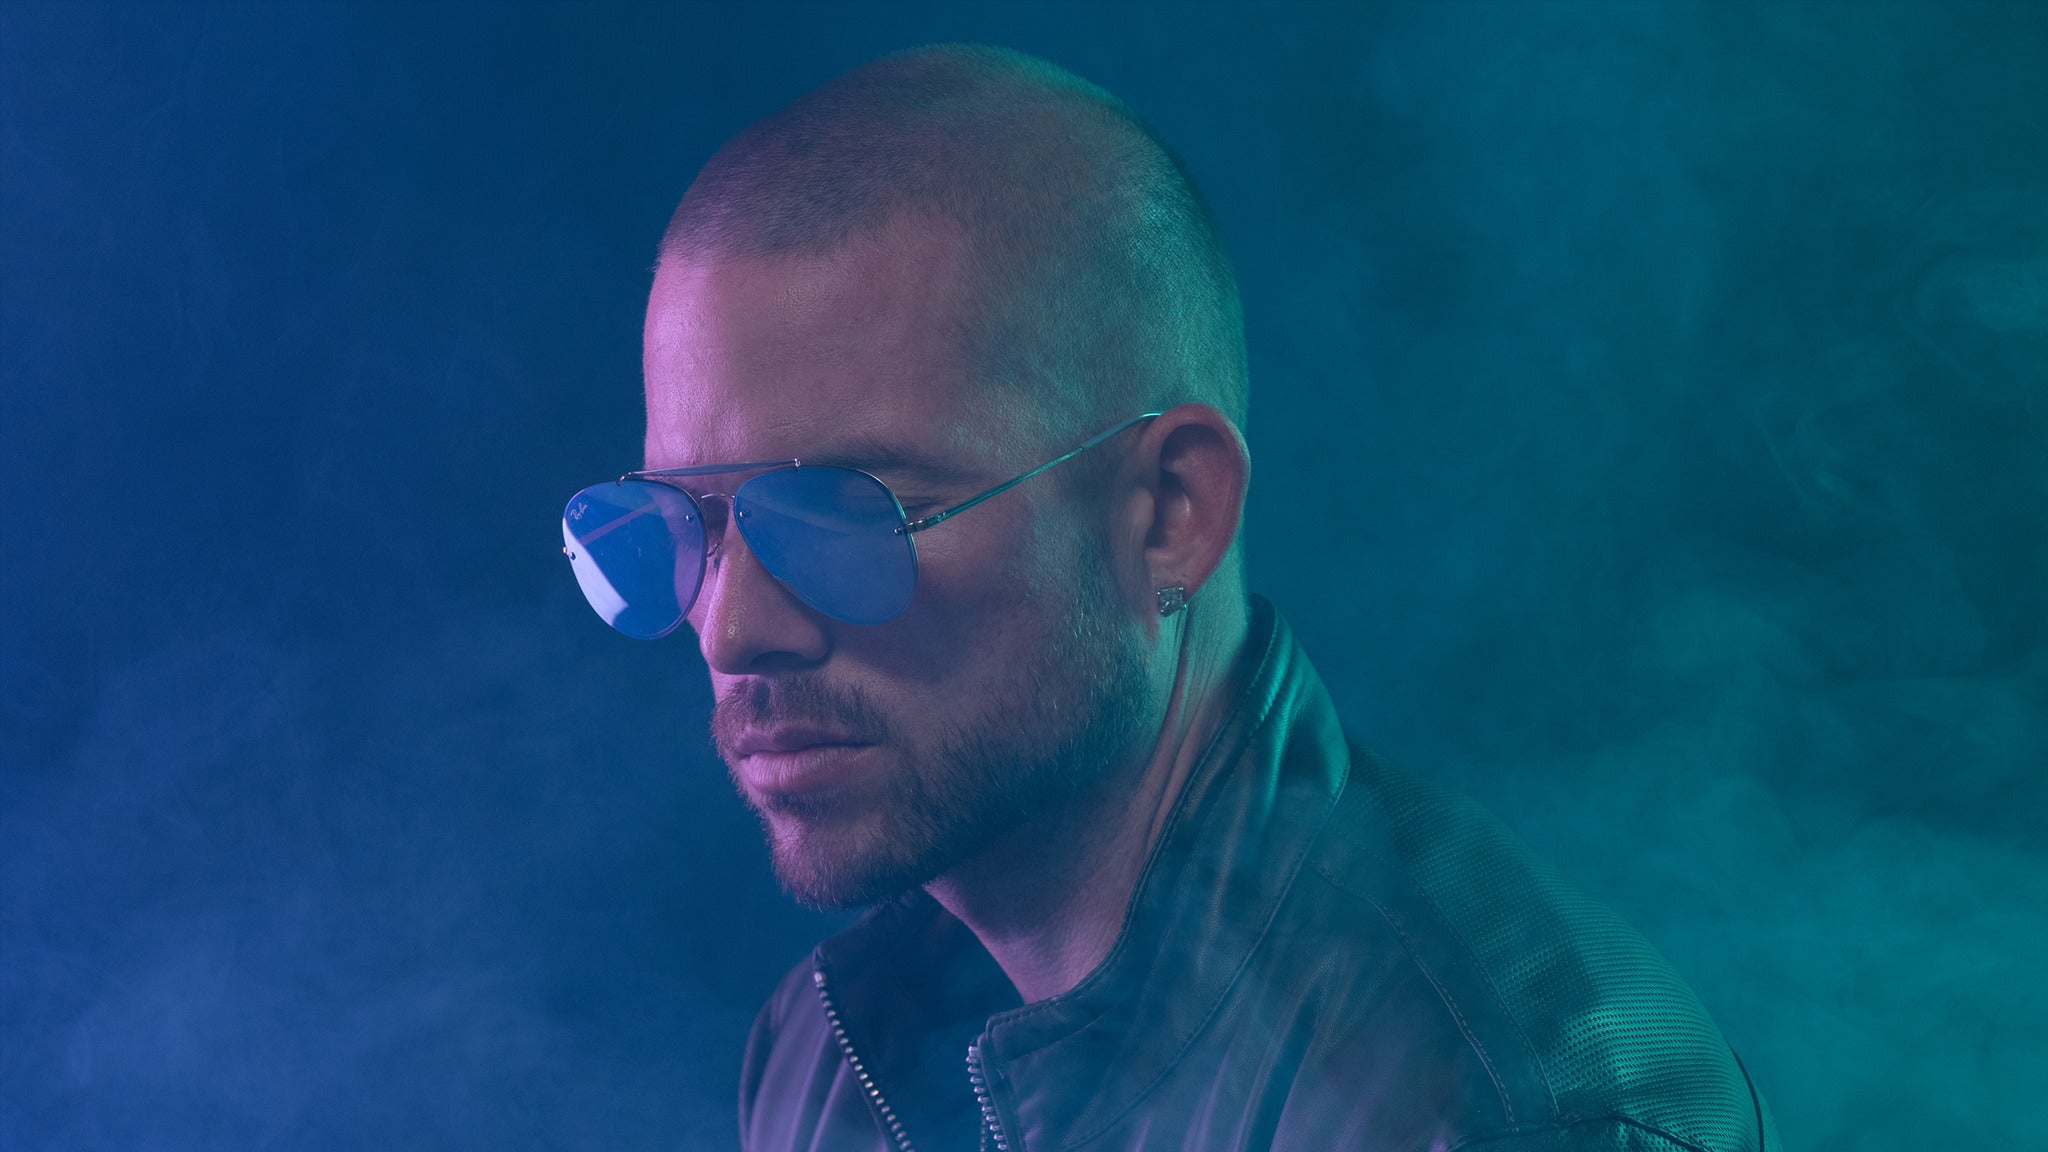 Collie Buddz at The Norva